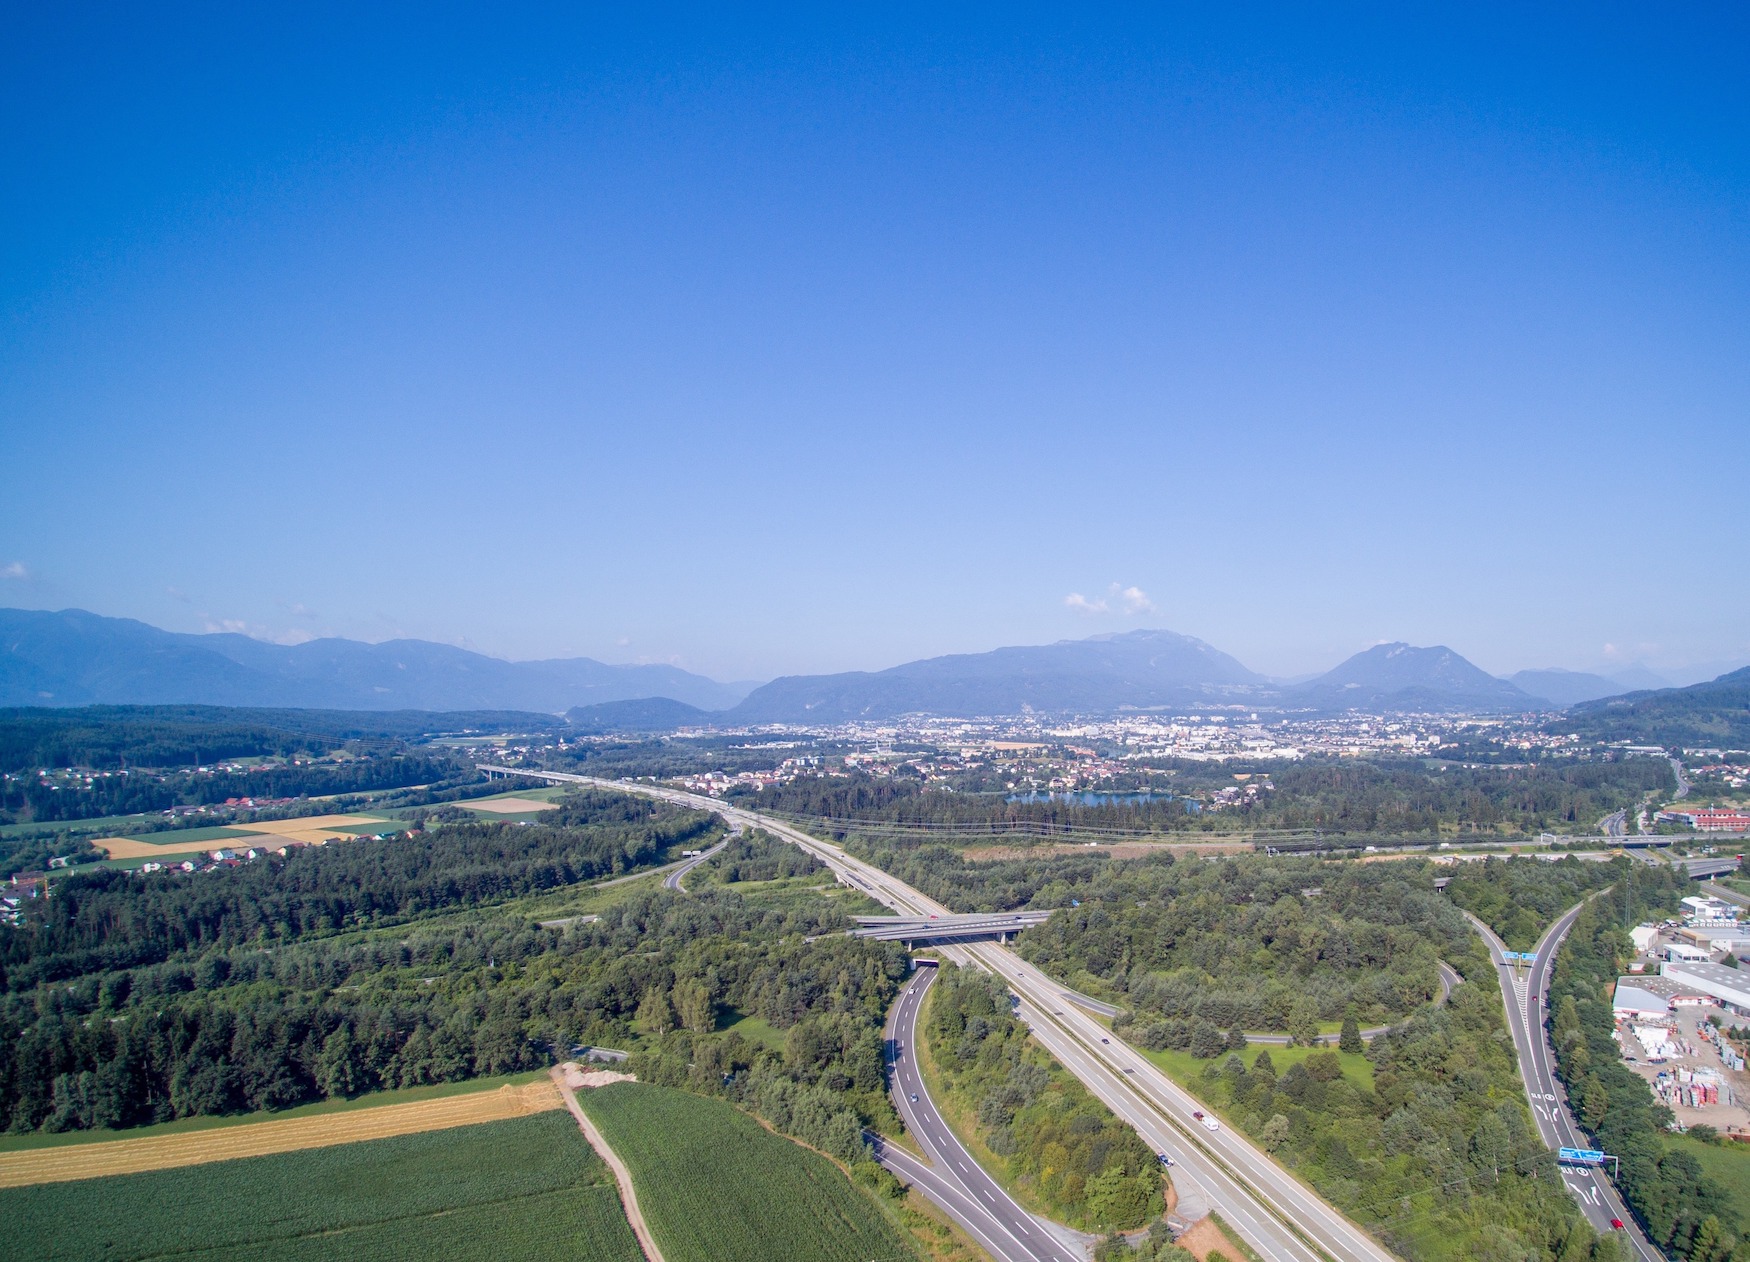 Main highway connection in Villach